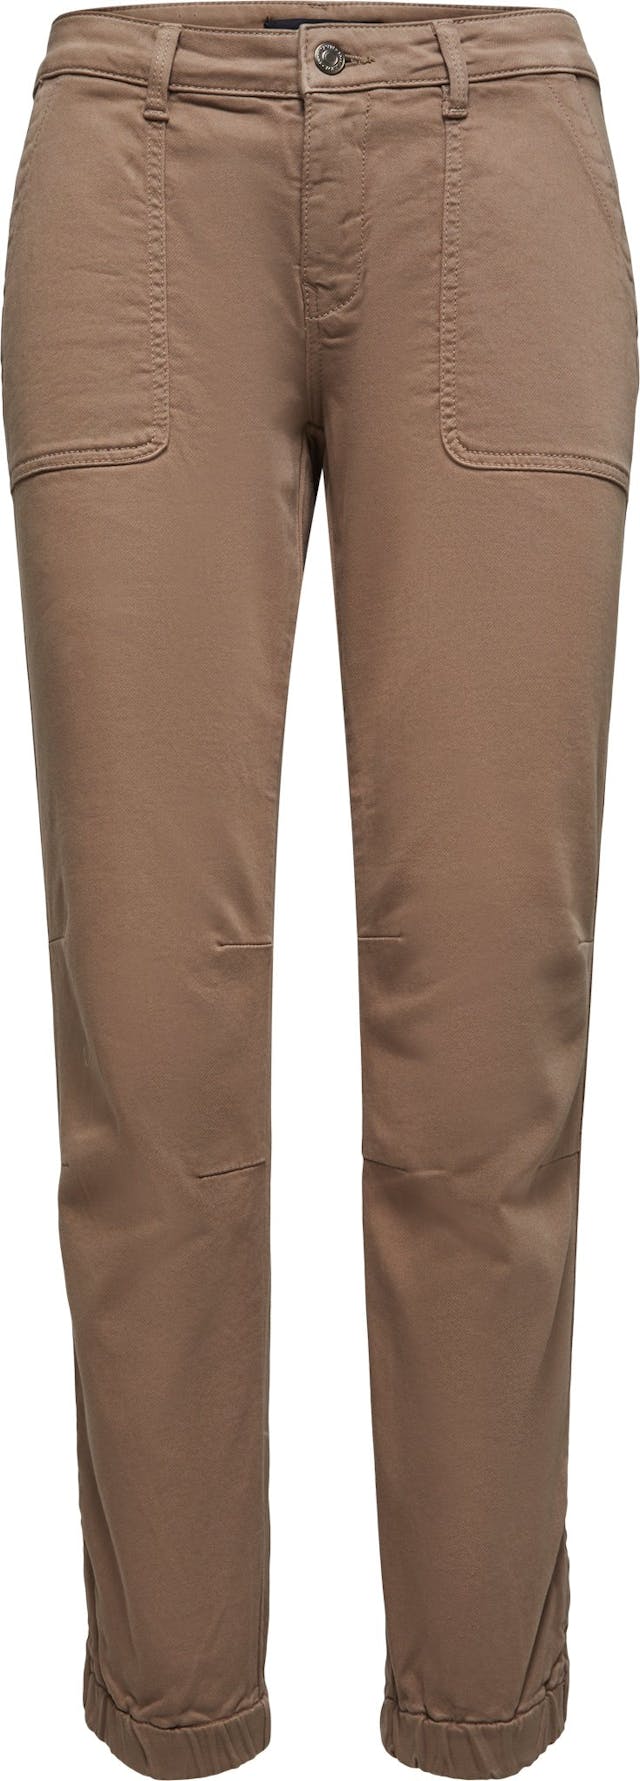 Product image for Ivy Slim cargo pants - Women's